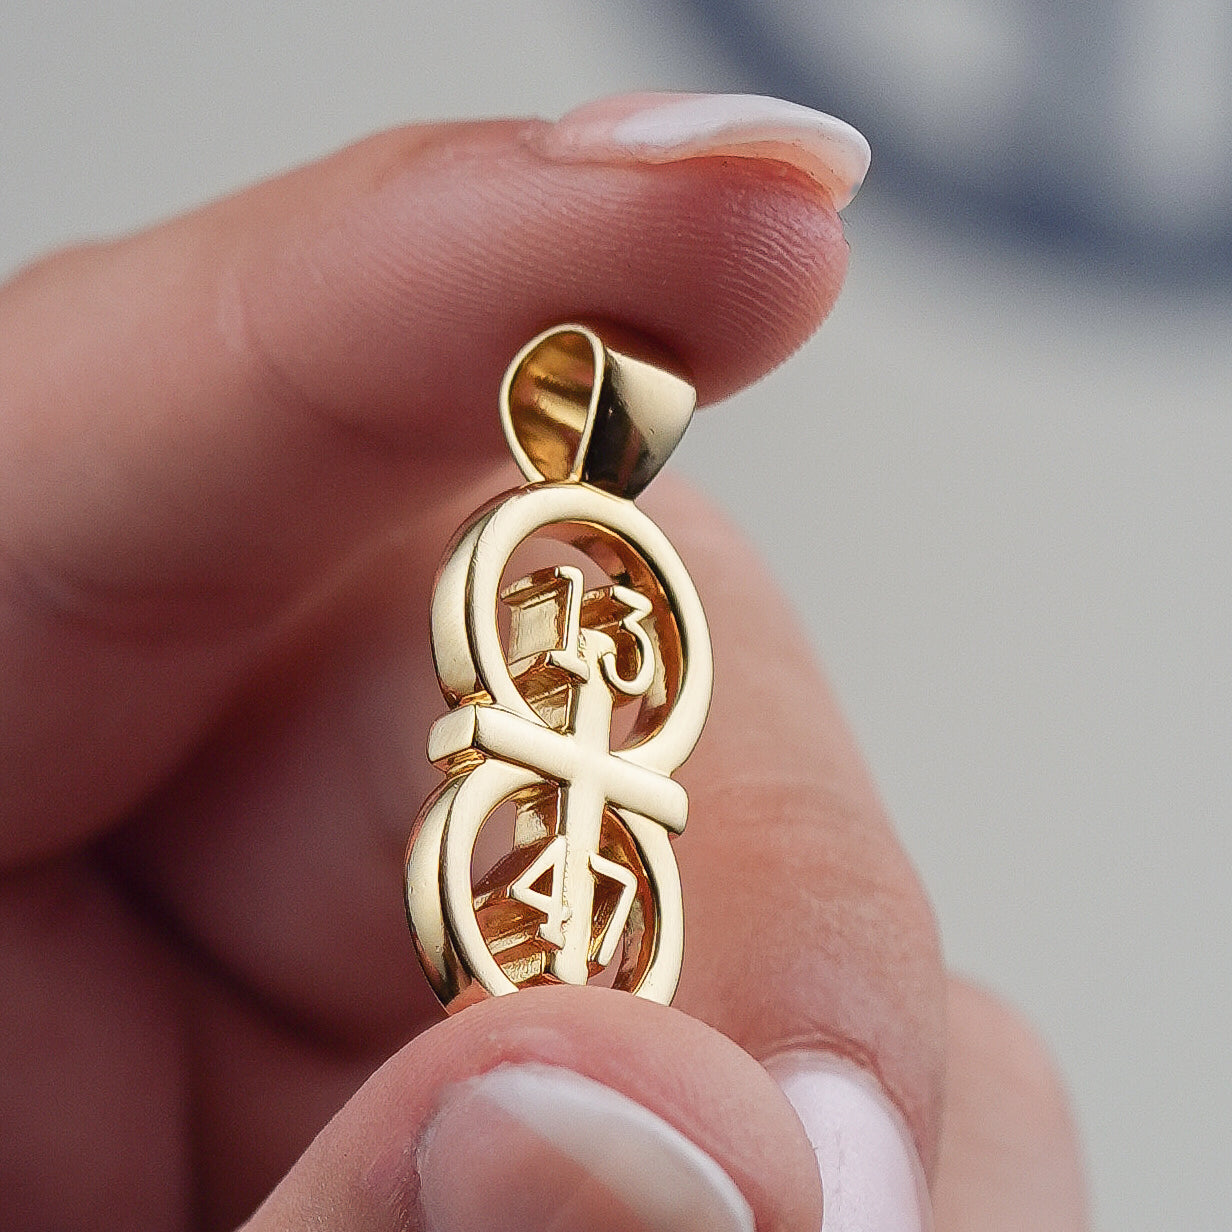 Closeup of our Gold pendant front size being held between two fingers for scale.  The RIYAN 29 and 11® pendant has the numbers 13, 4, and 4 intertwined with the cross to represent 1 Corinthians 13:4-7 with the chapter word "1 Corinthians" inscribed on the back.